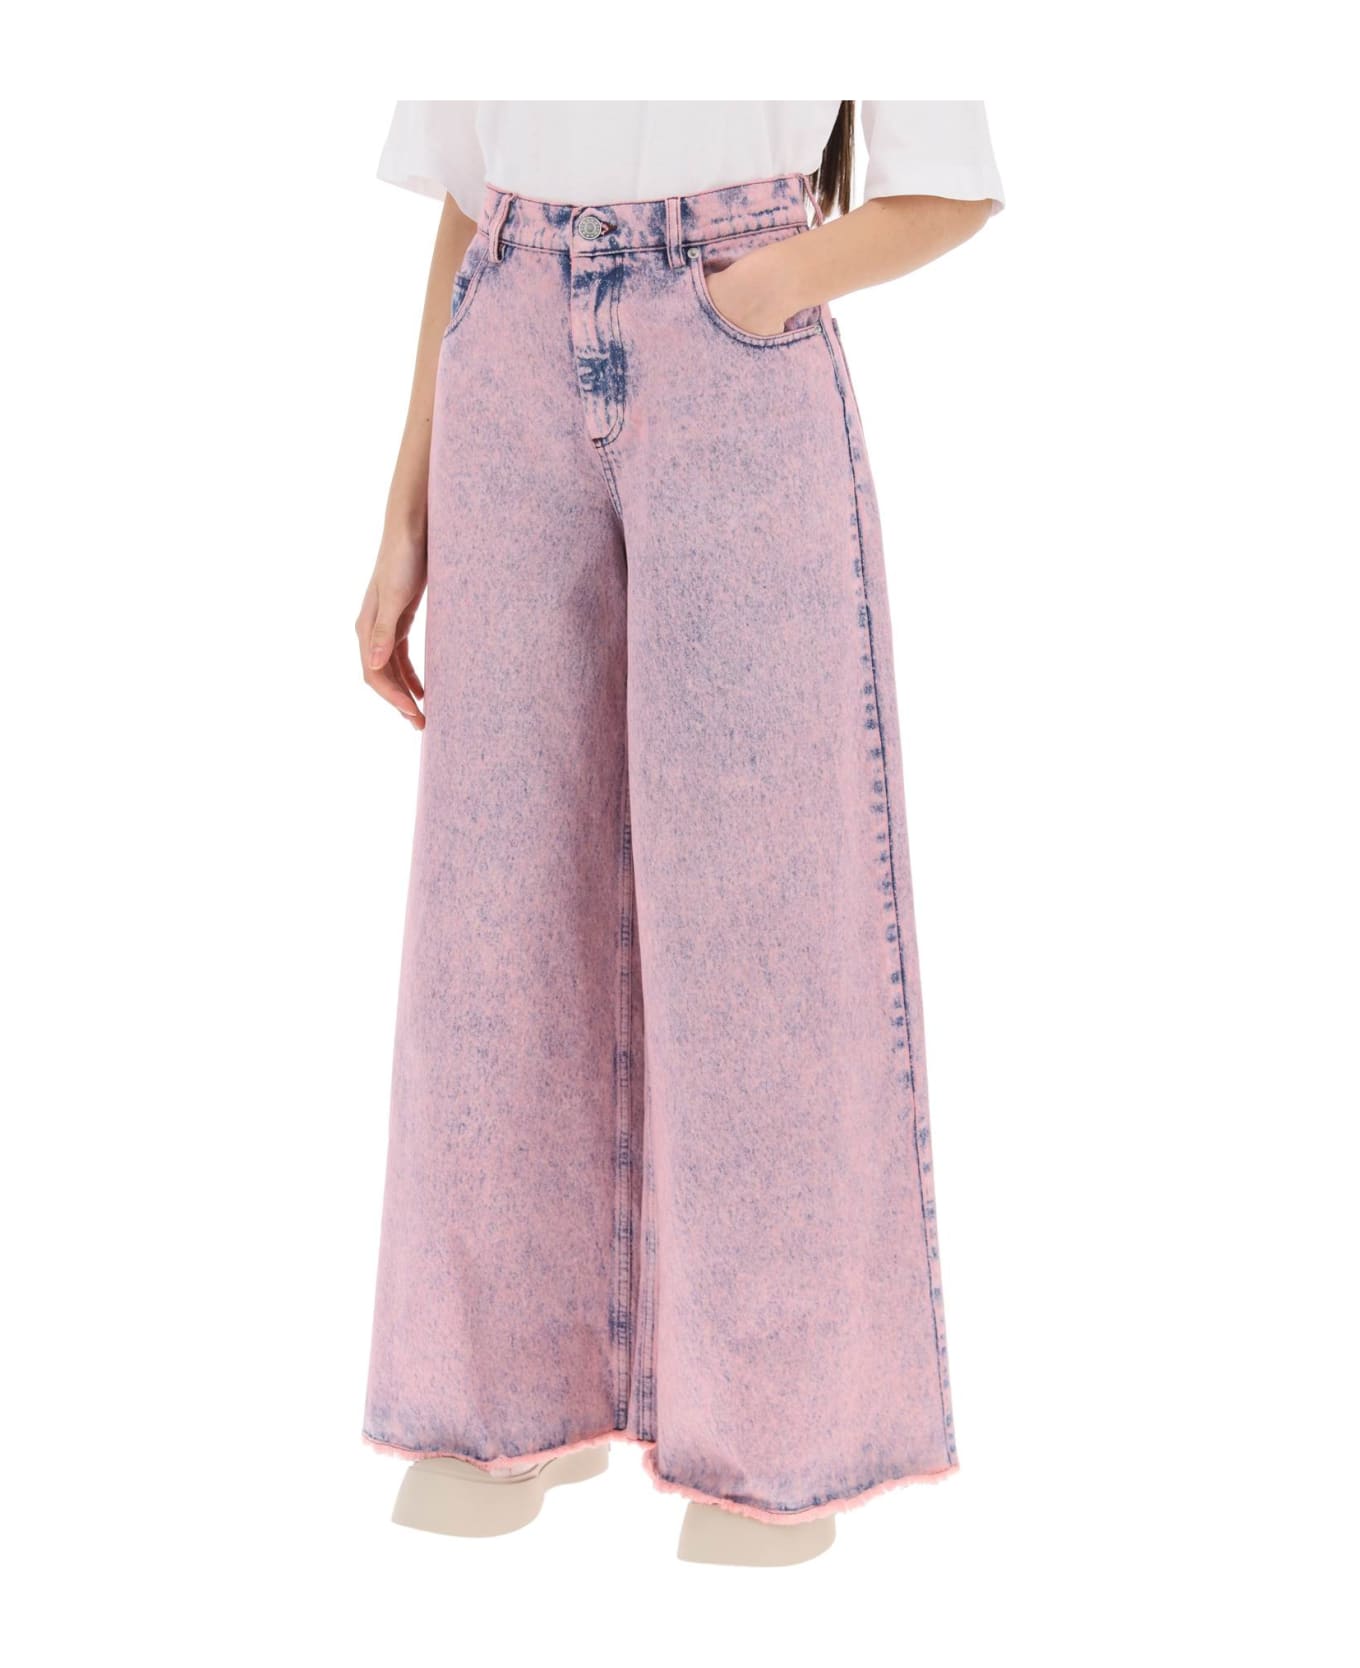 Marni Wide Leg Jeans In Overdyed Denim - PINK GUMMY (Pink)